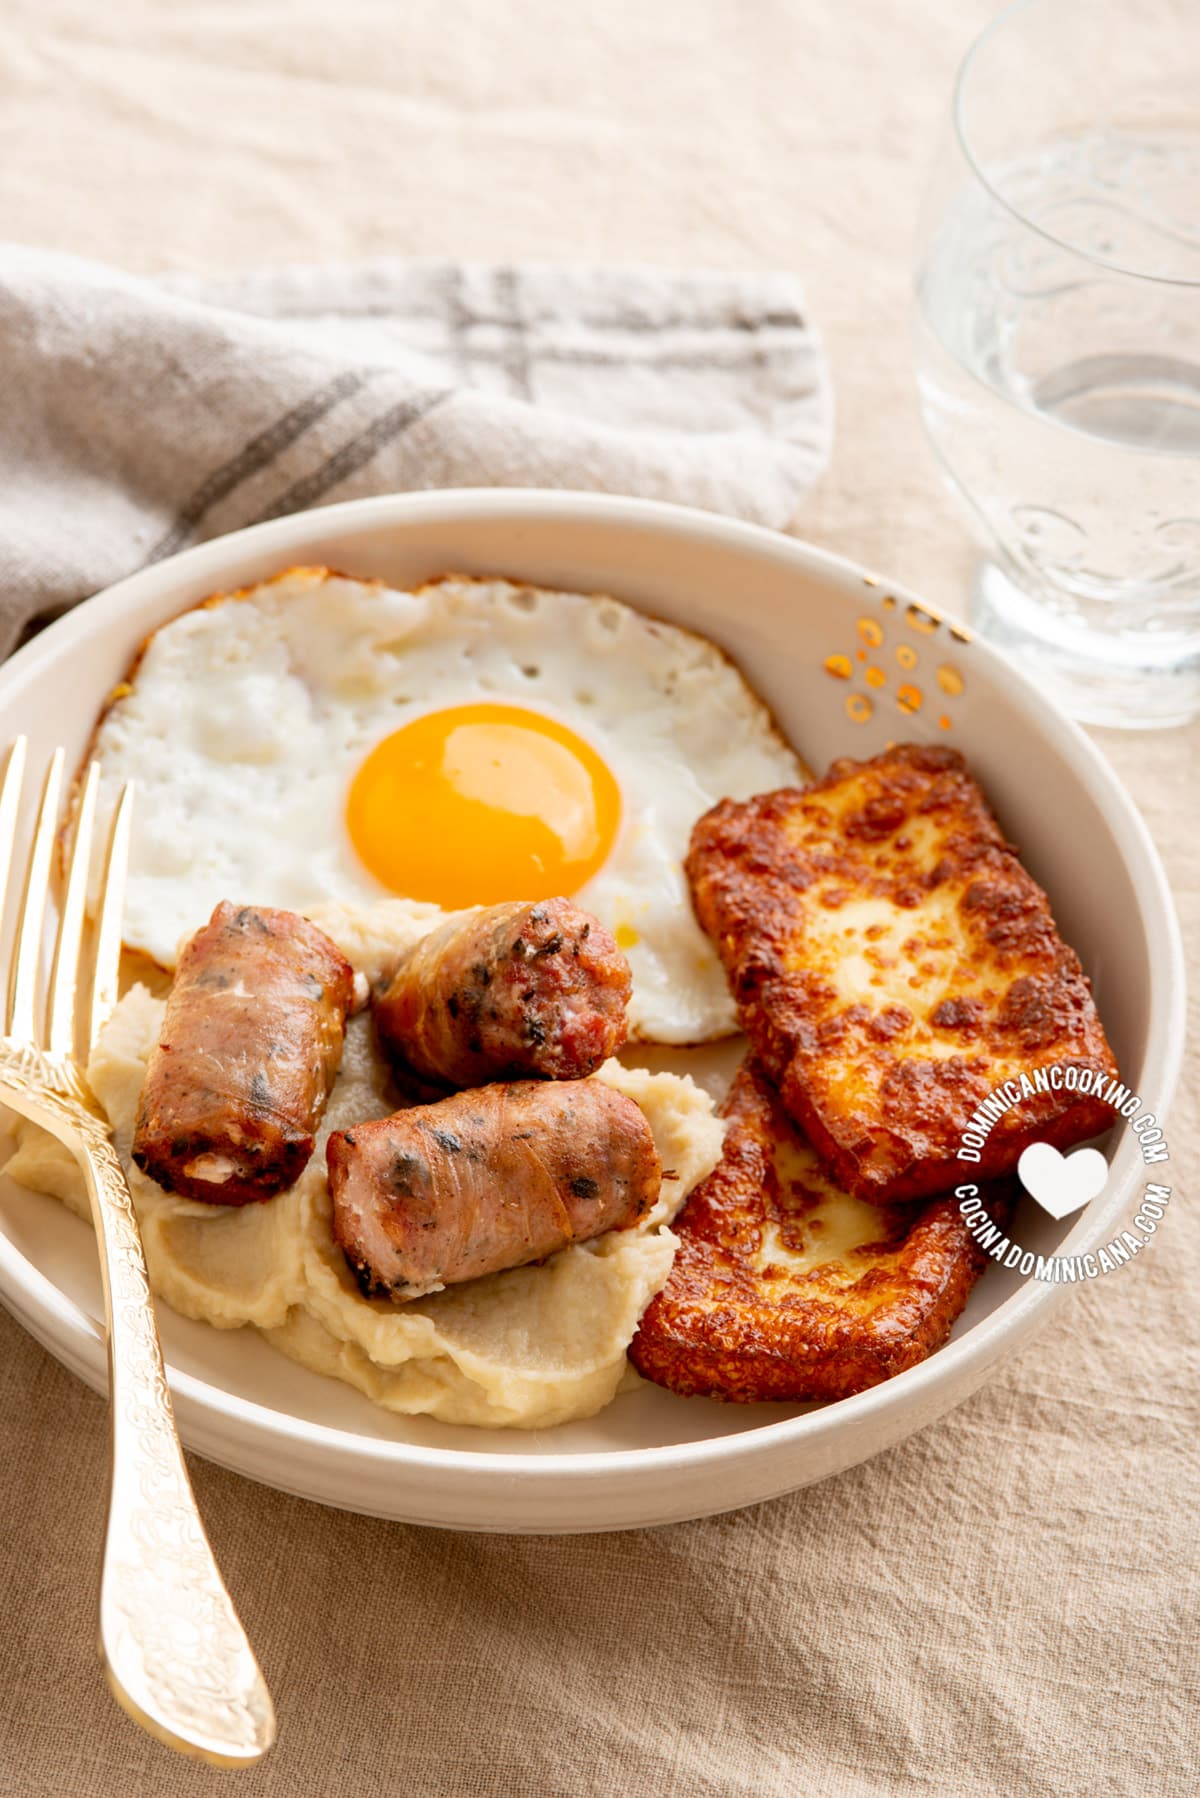 Dominican keto breakfast of fried cheese, egg and sausage with mash.